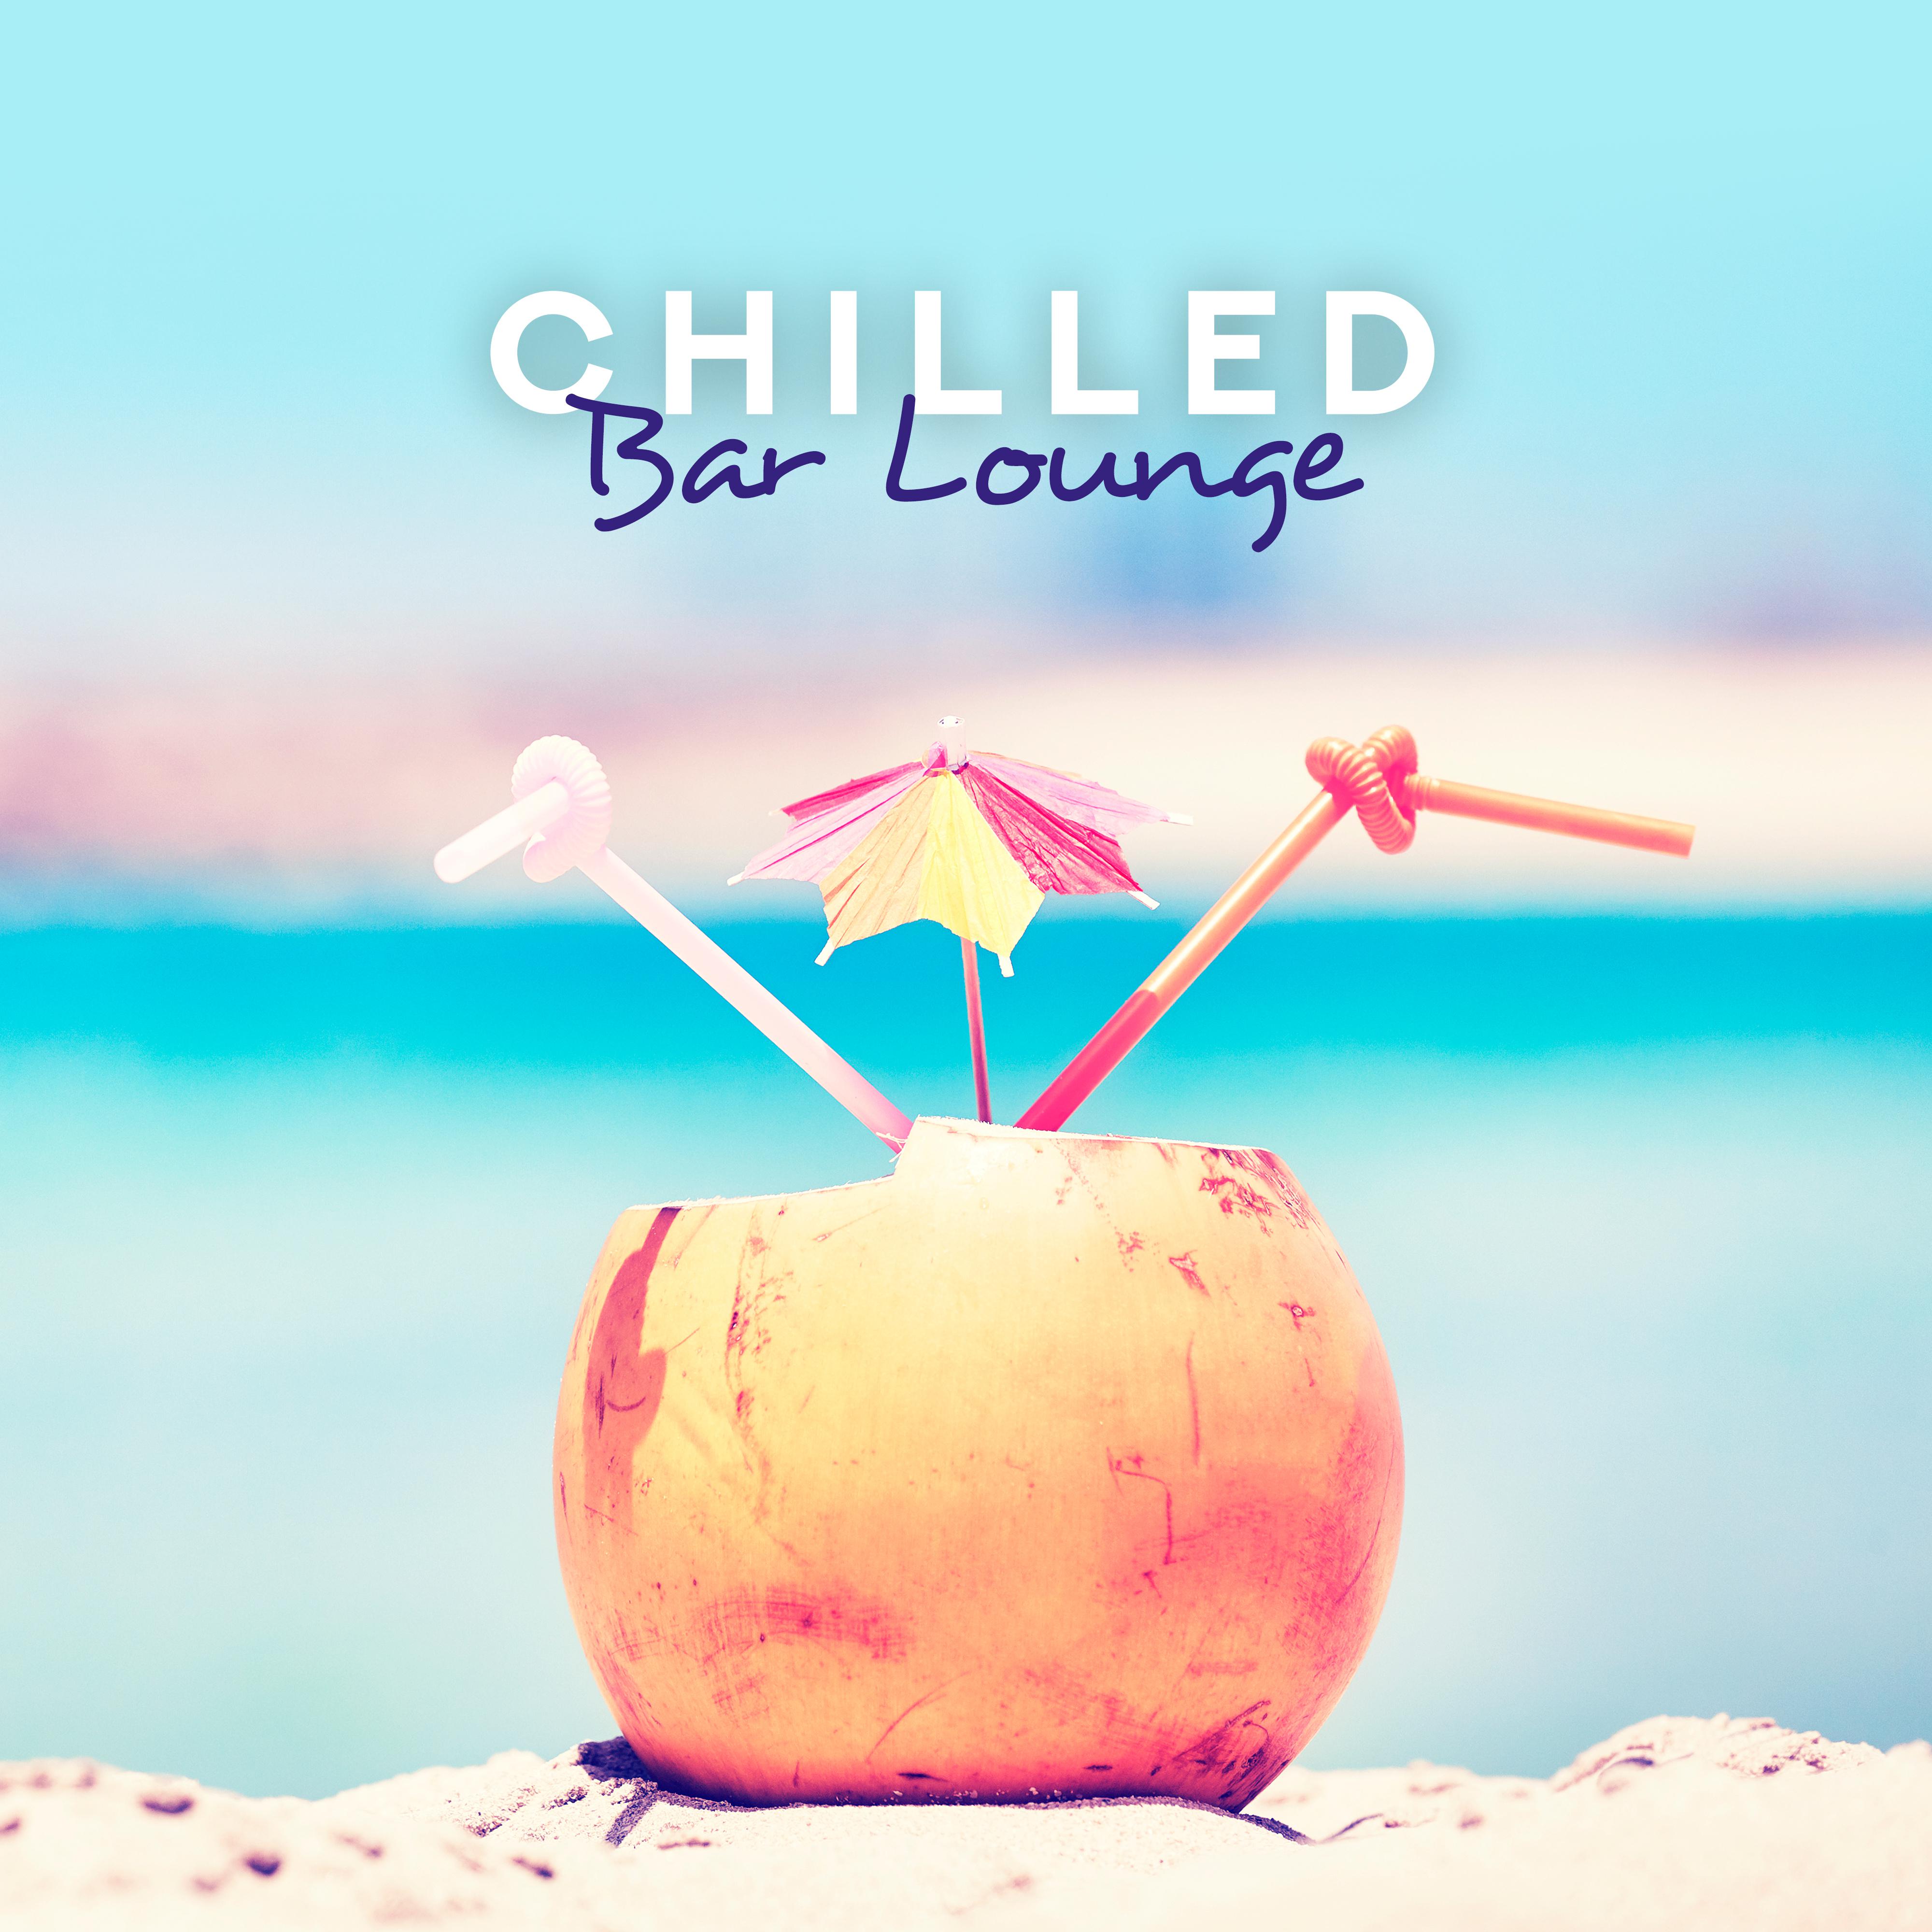 Chilled Bar Lounge – Ibiza Chill Out, Stress Relief, Calming Hits, Beach Relaxation, Summer Chill Out 2019, Cocktail Party